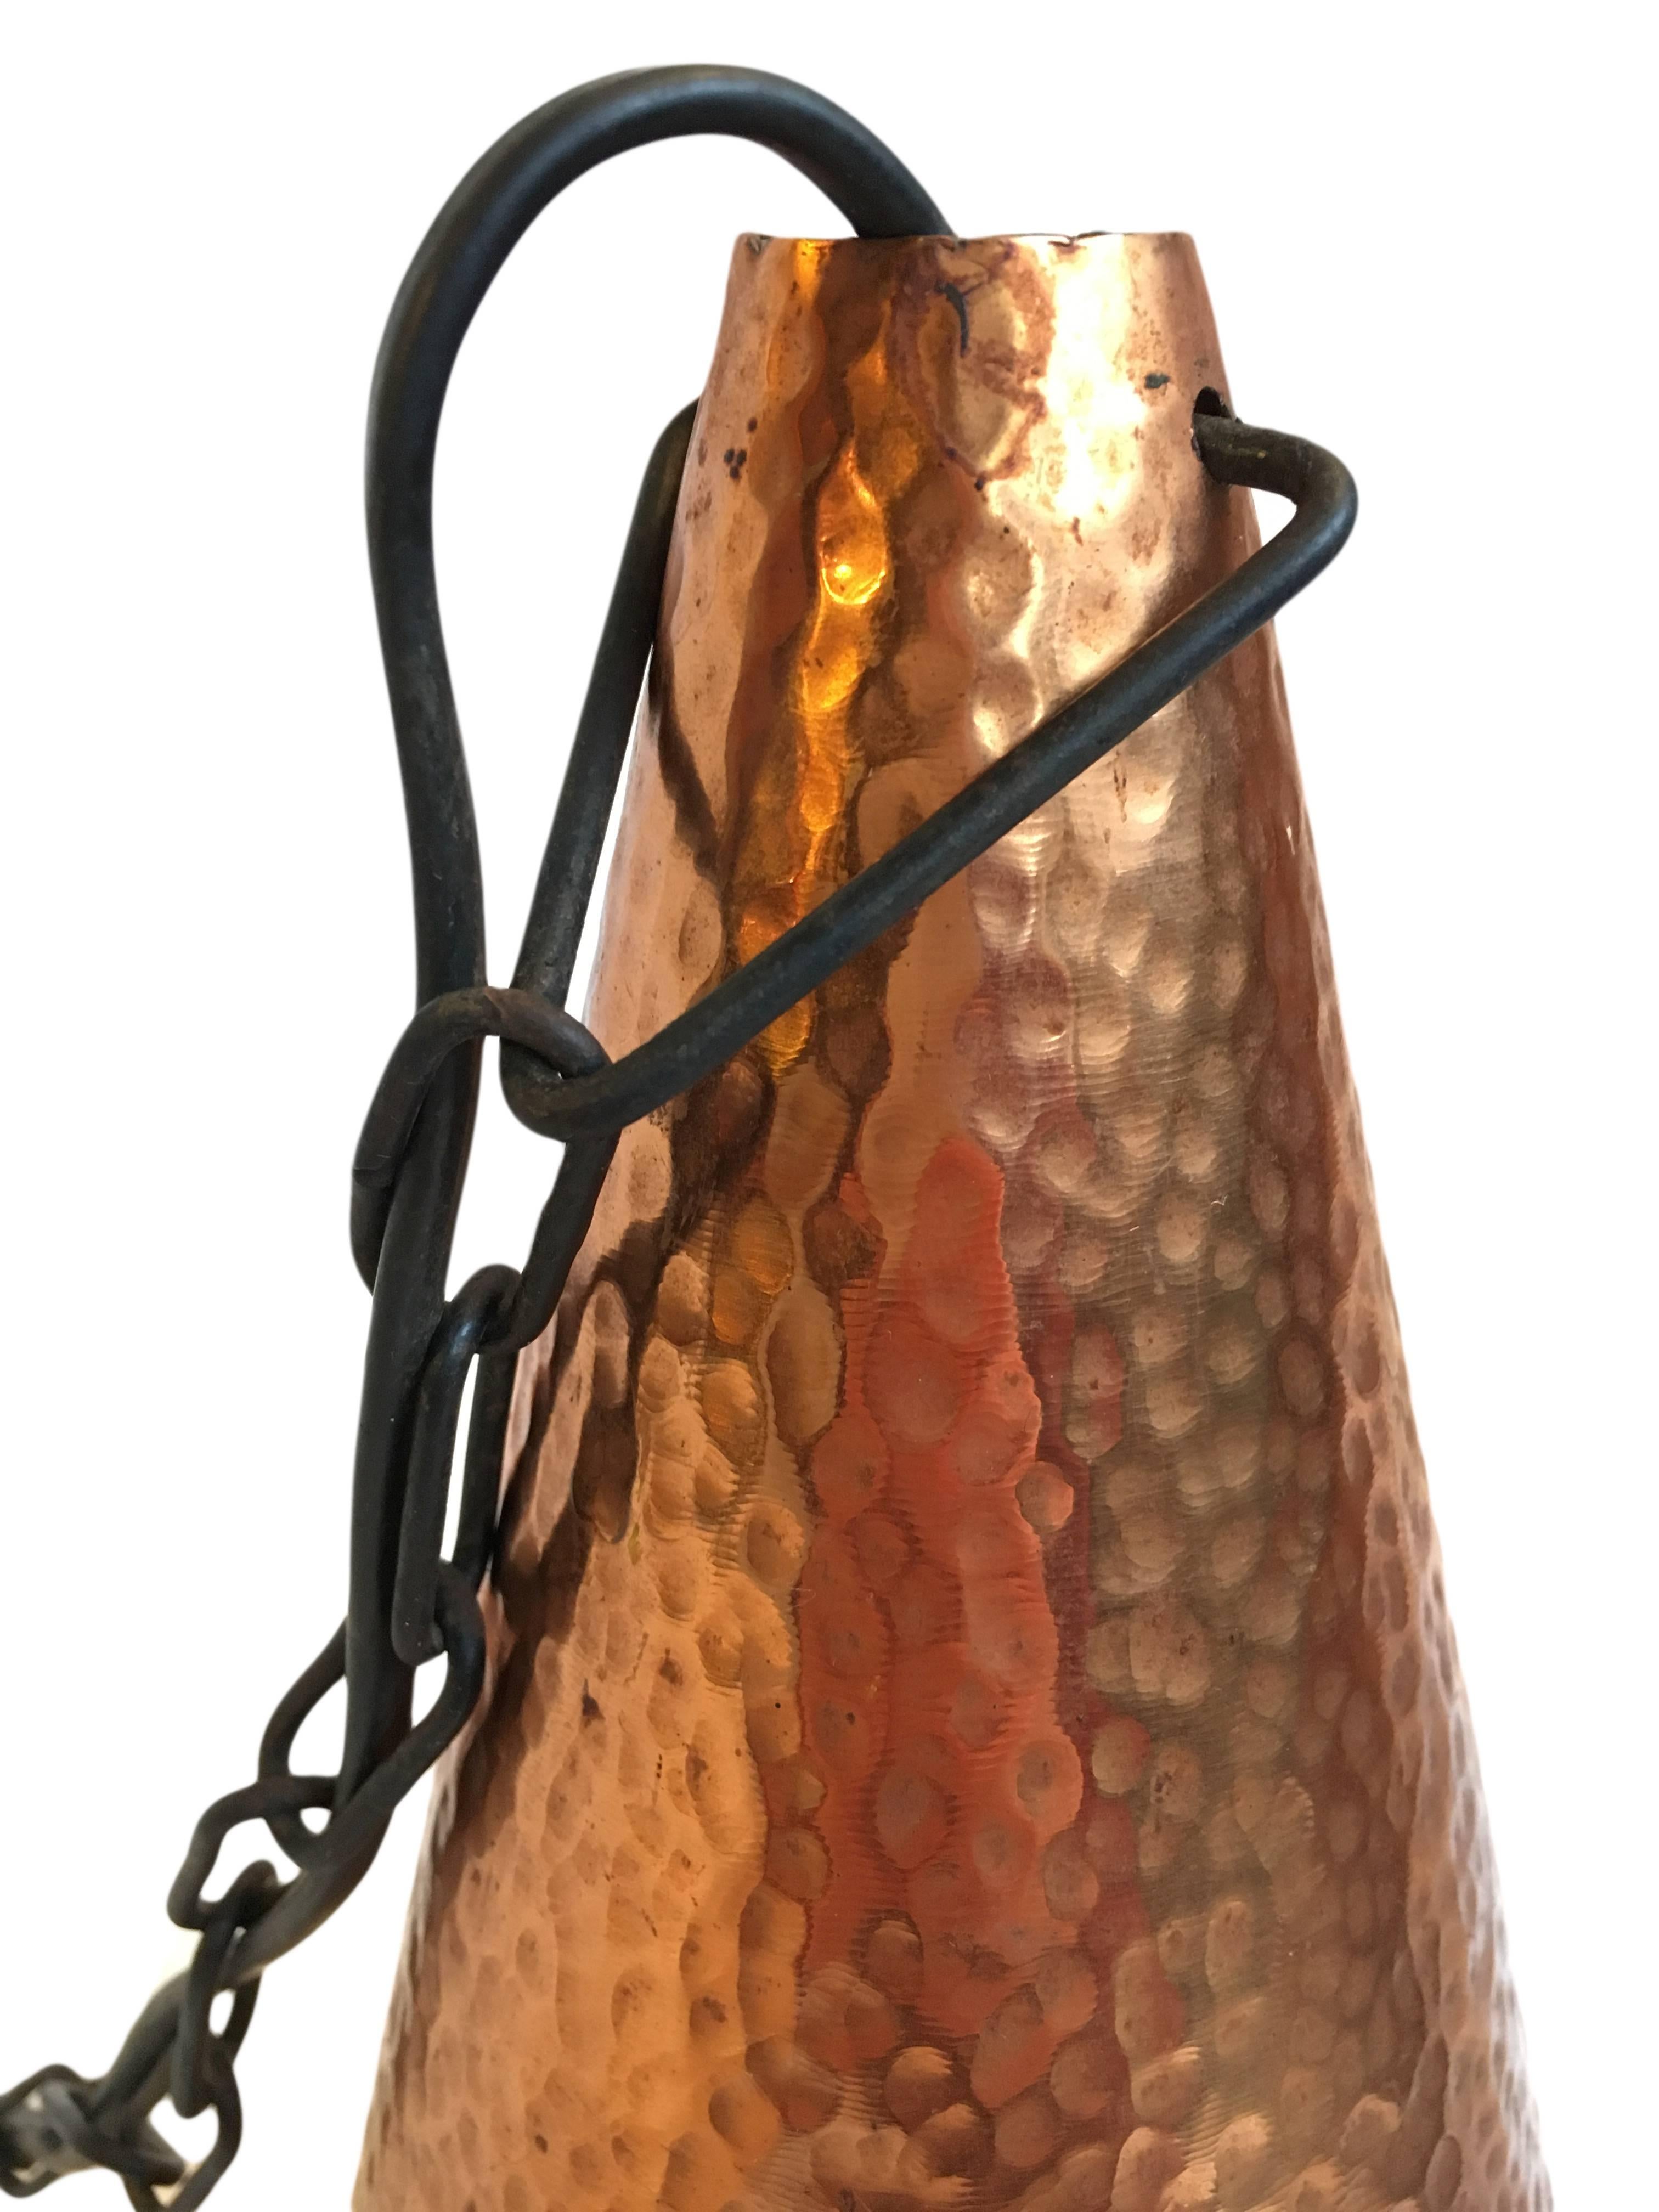 Arts and Crafts Hammered Copper Pendant Lights, a pair, Denmark. 